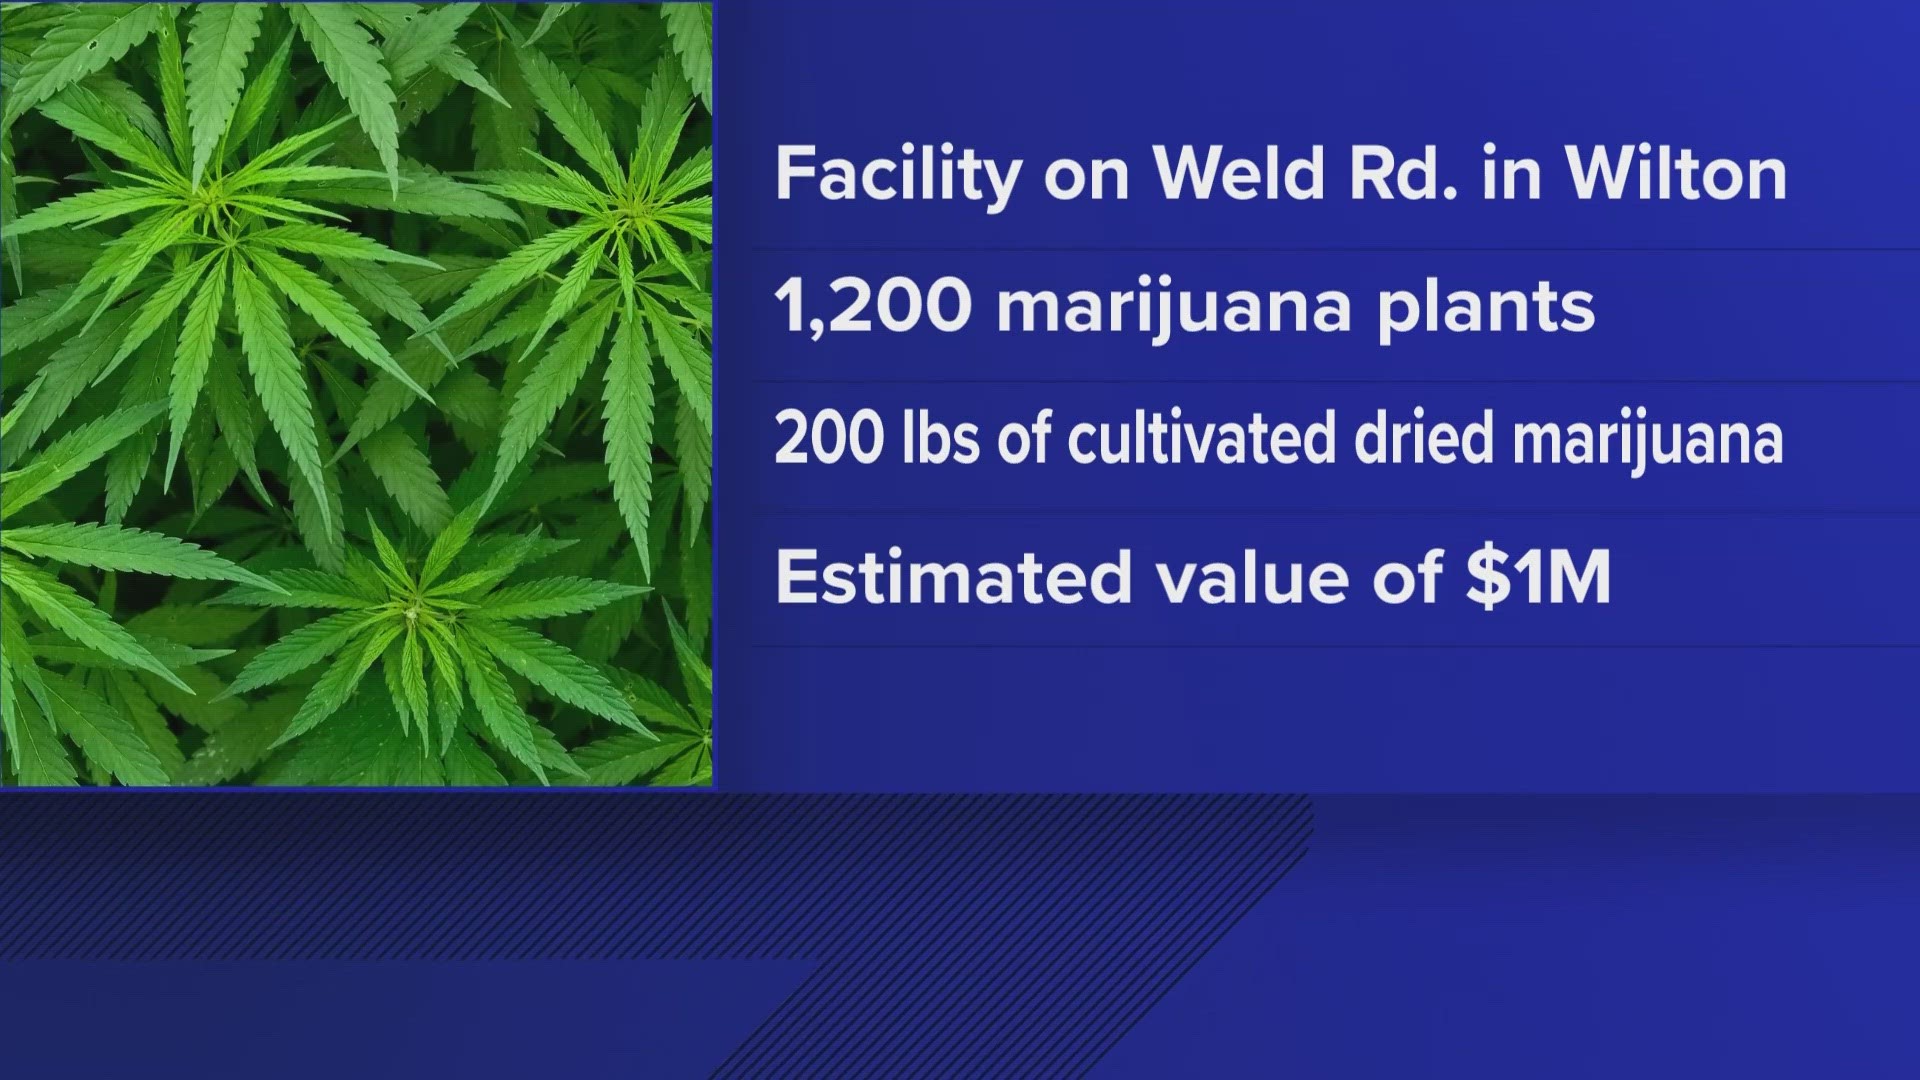 The total value of the illegally cultivated marijuana found Tuesday is estimated at $1,000,000, police said.